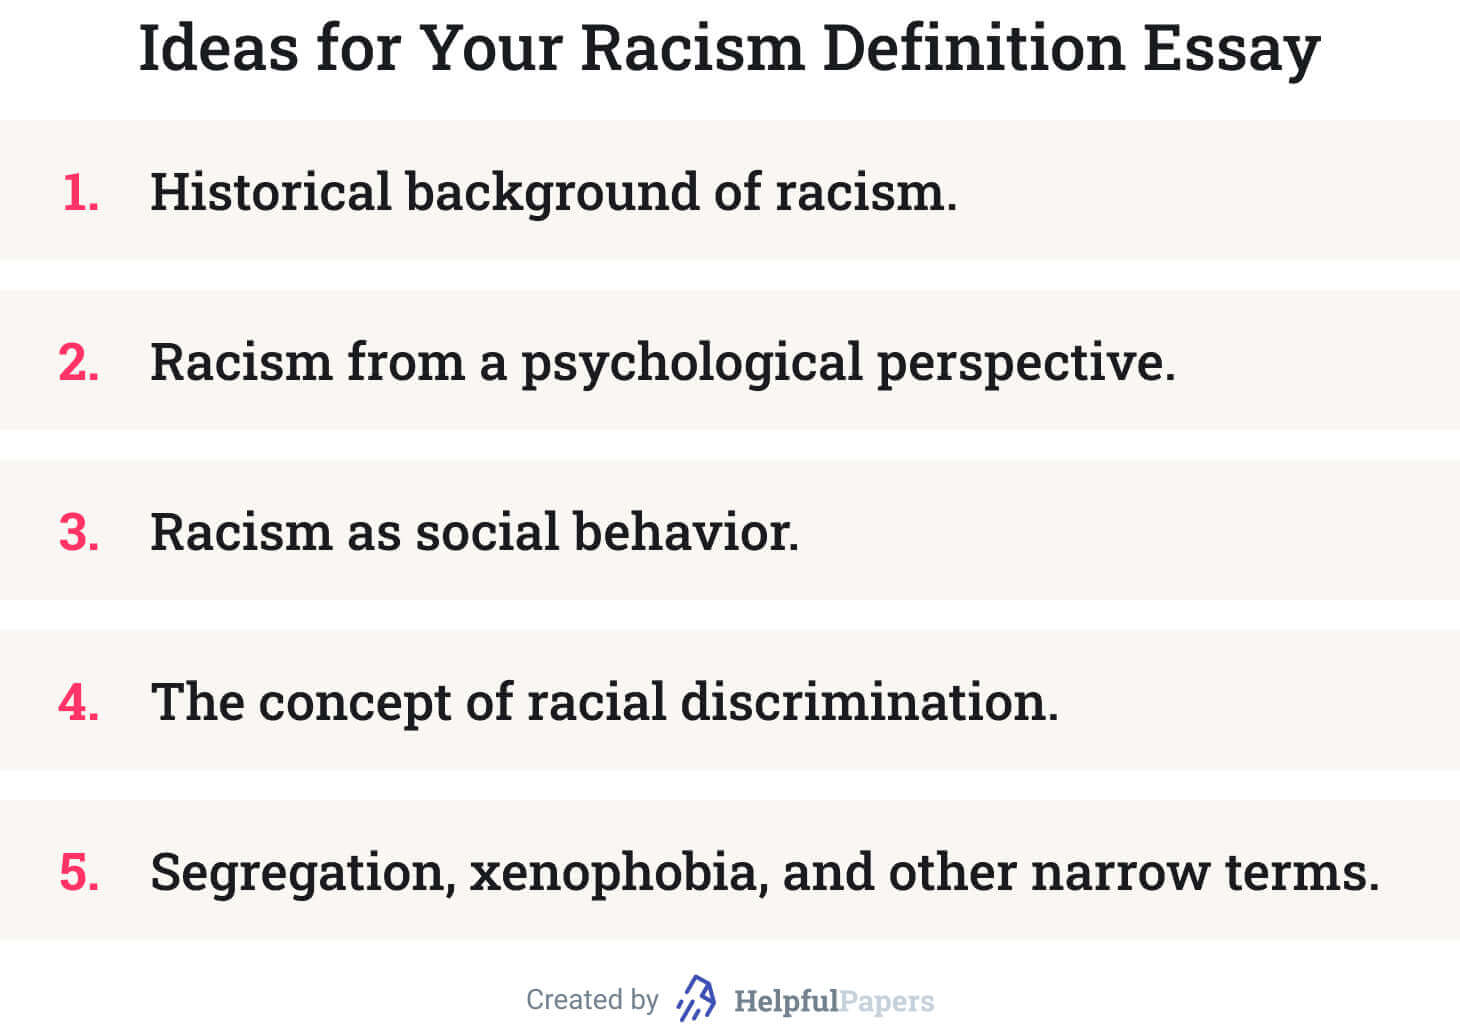 This picture shows ideas for a racism definition essay.